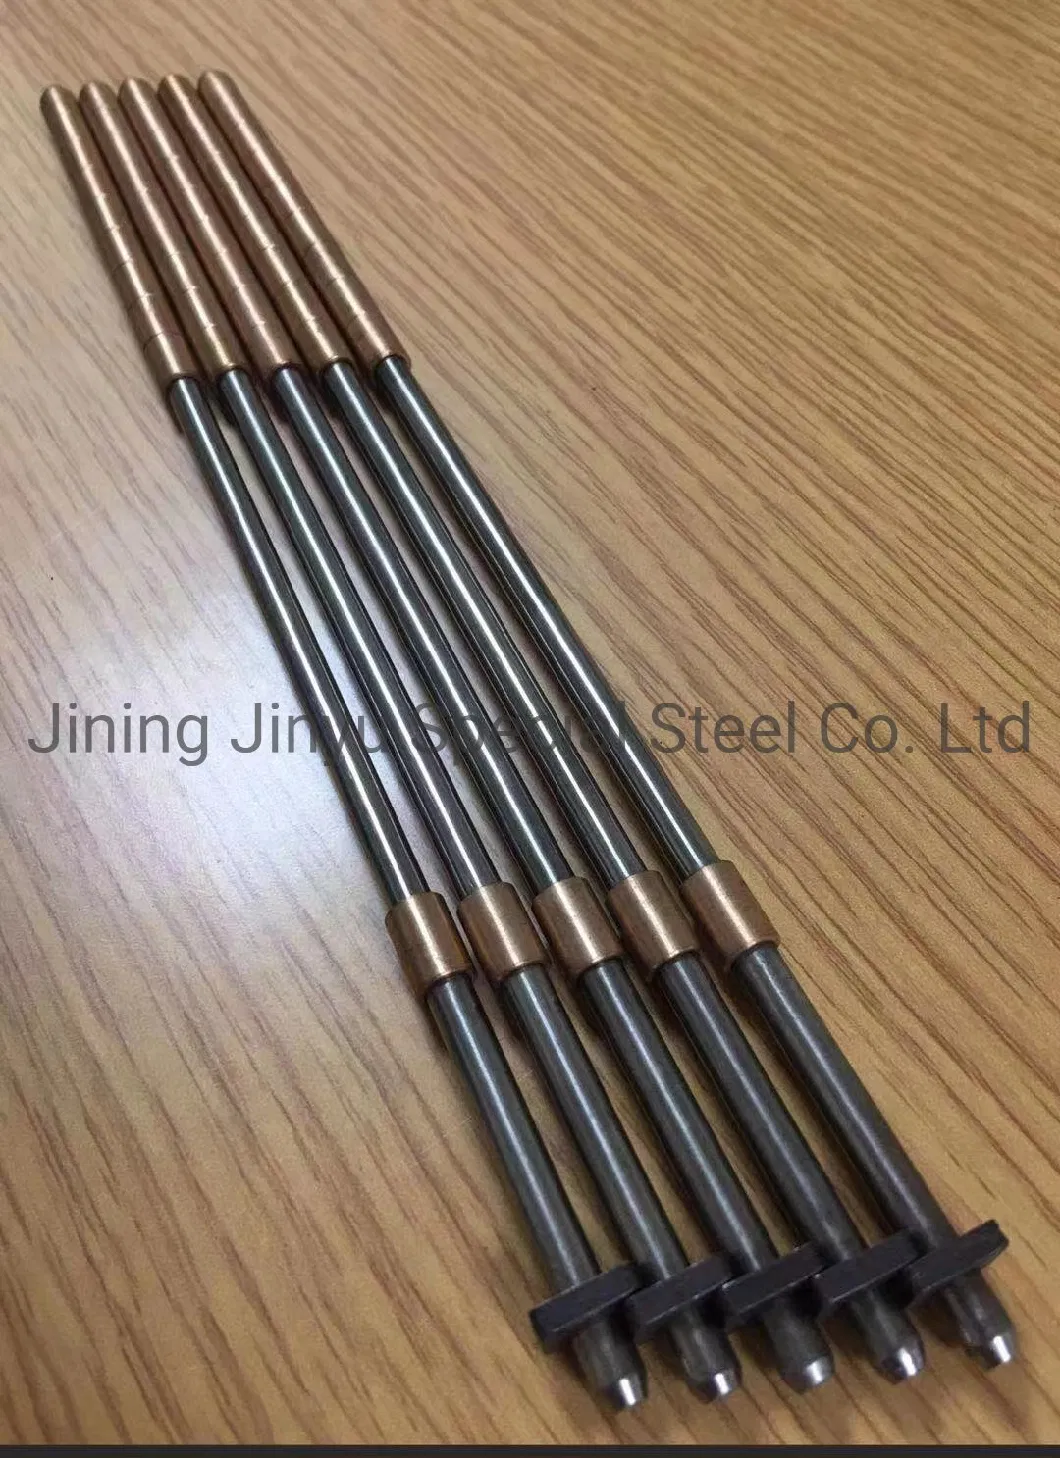 High Quality Bending Rods for Roller Rods with 19 Brass Bushings